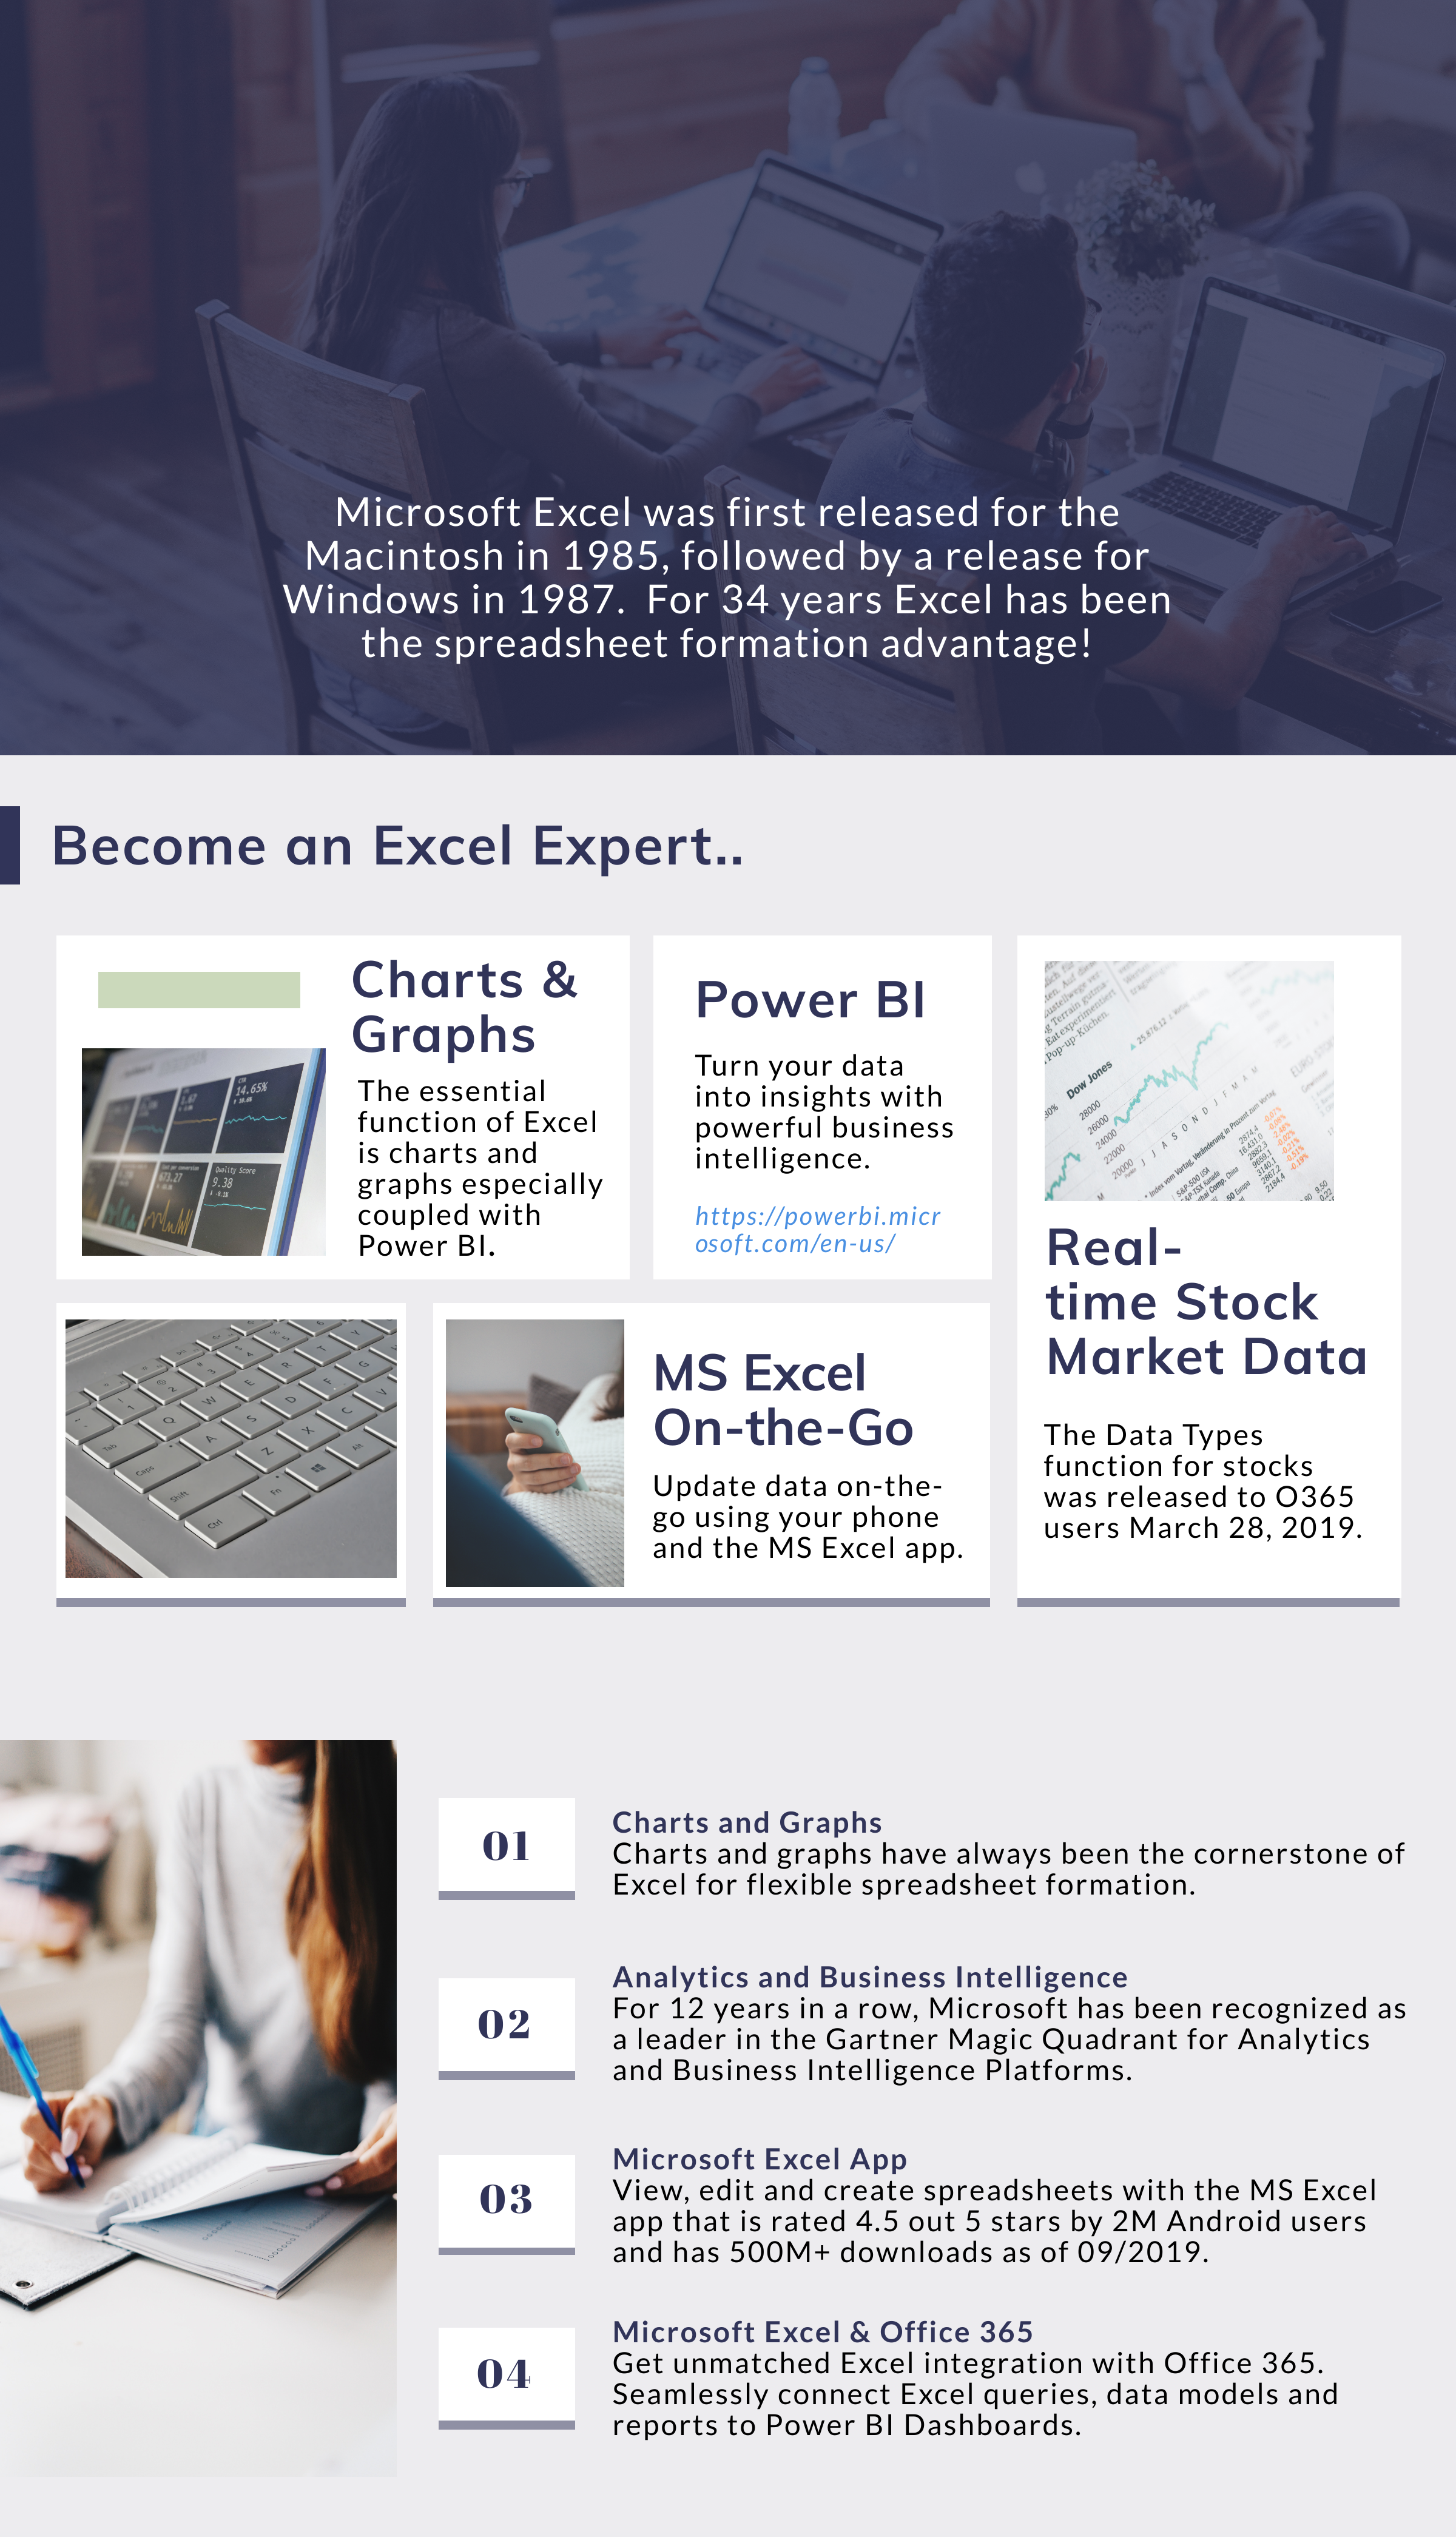 Info graphic to showcase top benefits of Microsoft Excel.